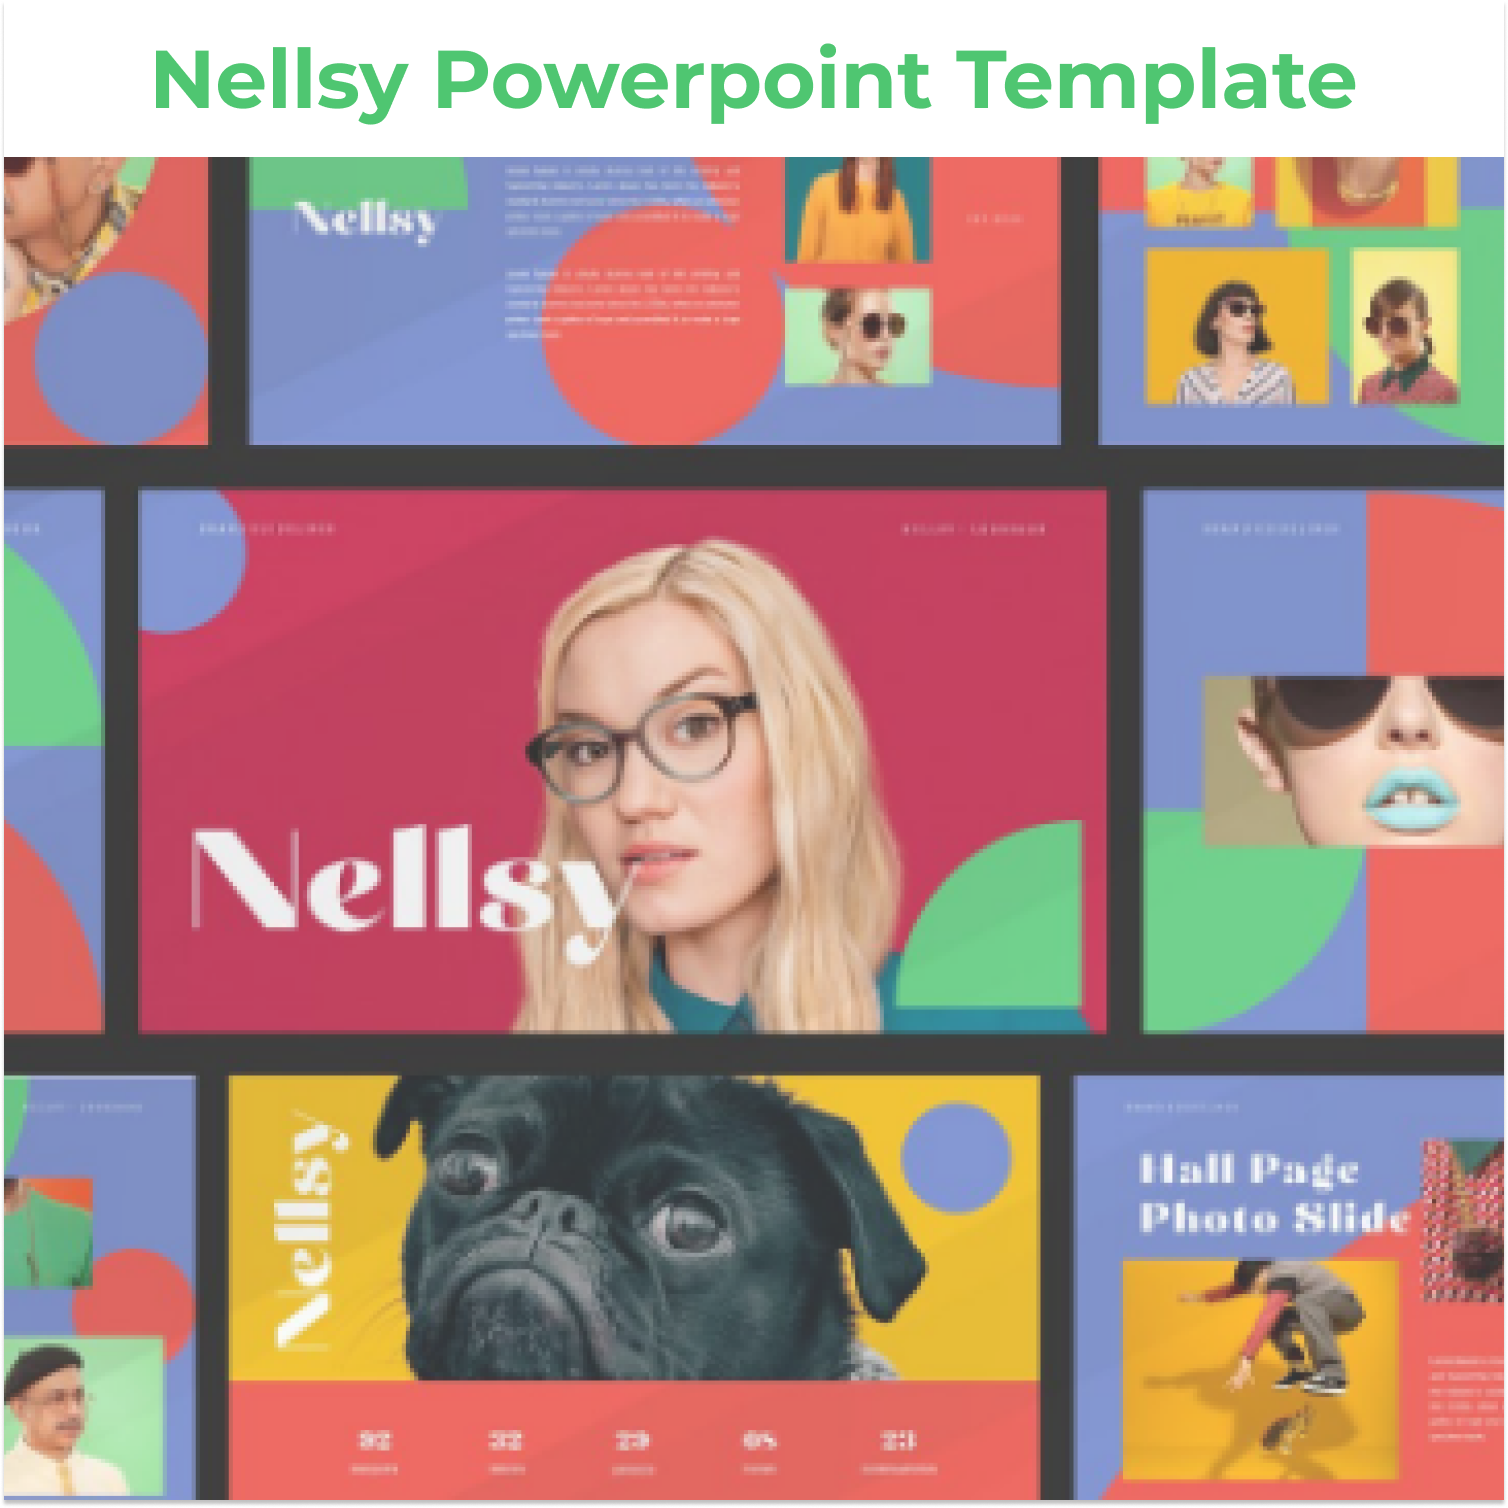 Nellsy Powerpoint Template cover image.